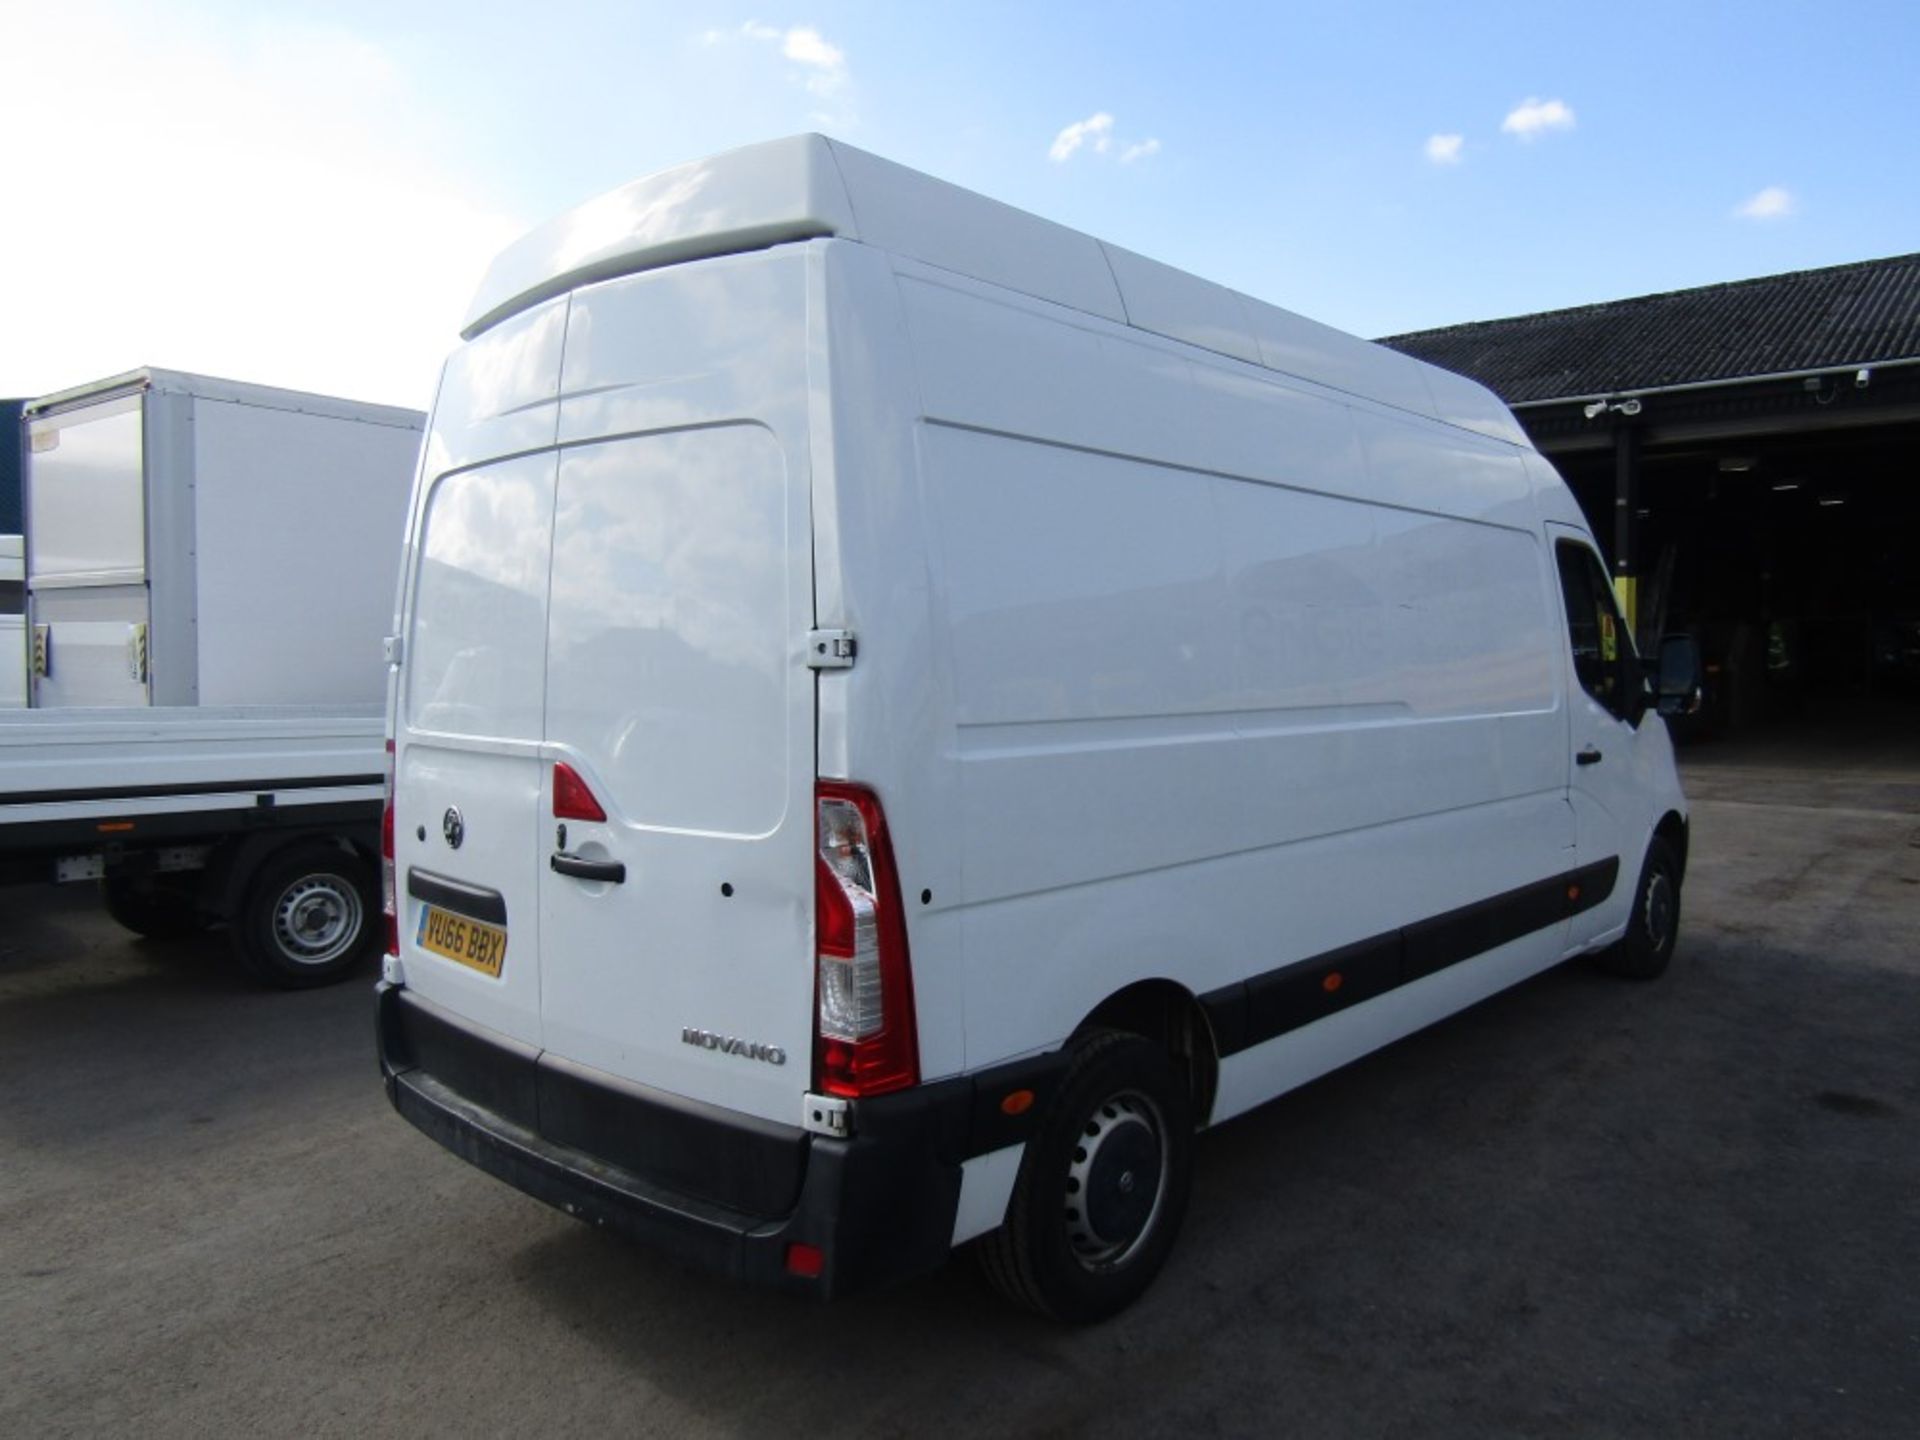 66 reg VAUXHALL MOVANO F3500 L3H3 CDTI, 1ST REG 09/16, TEST 09/22, 58452M, V5 HERE, 1 OWNER FROM NEW - Image 4 of 7